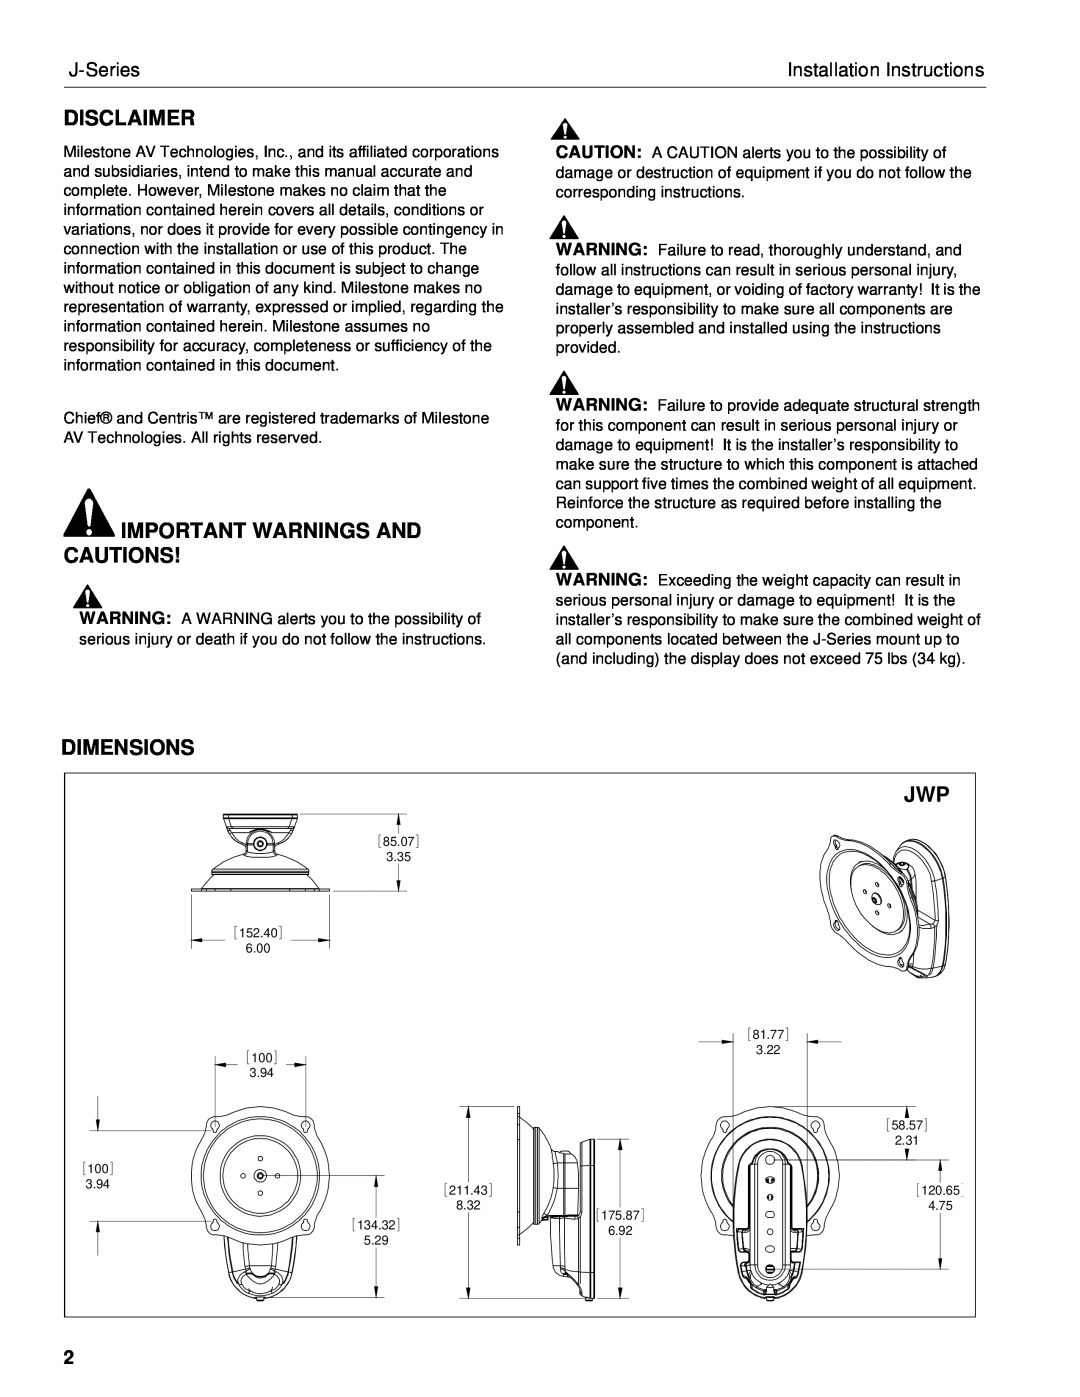 Chief Manufacturing JWD, JWP Disclaimer, Important Warnings And Cautions, Dimensions, J-Series, Installation Instructions 